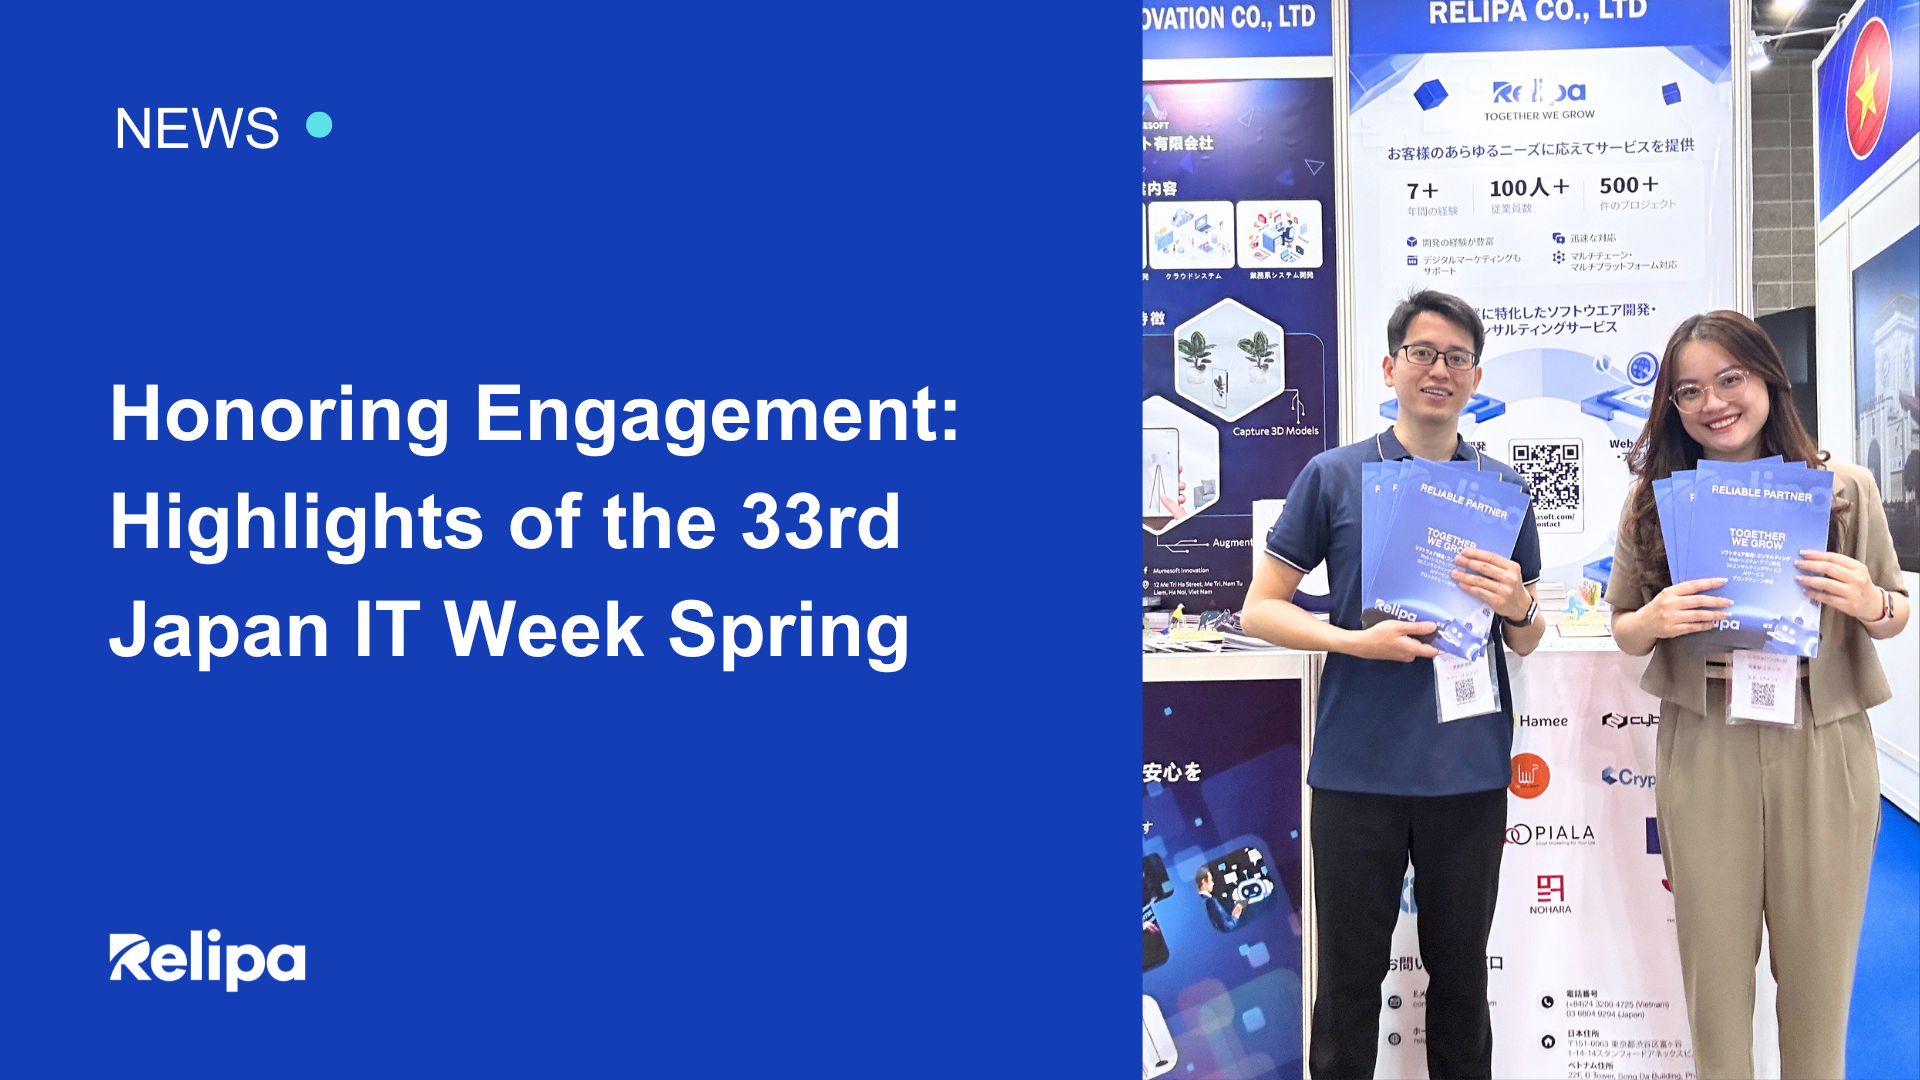 Honoring Engagement: Highlights of the 33rd Japan IT Week Spring